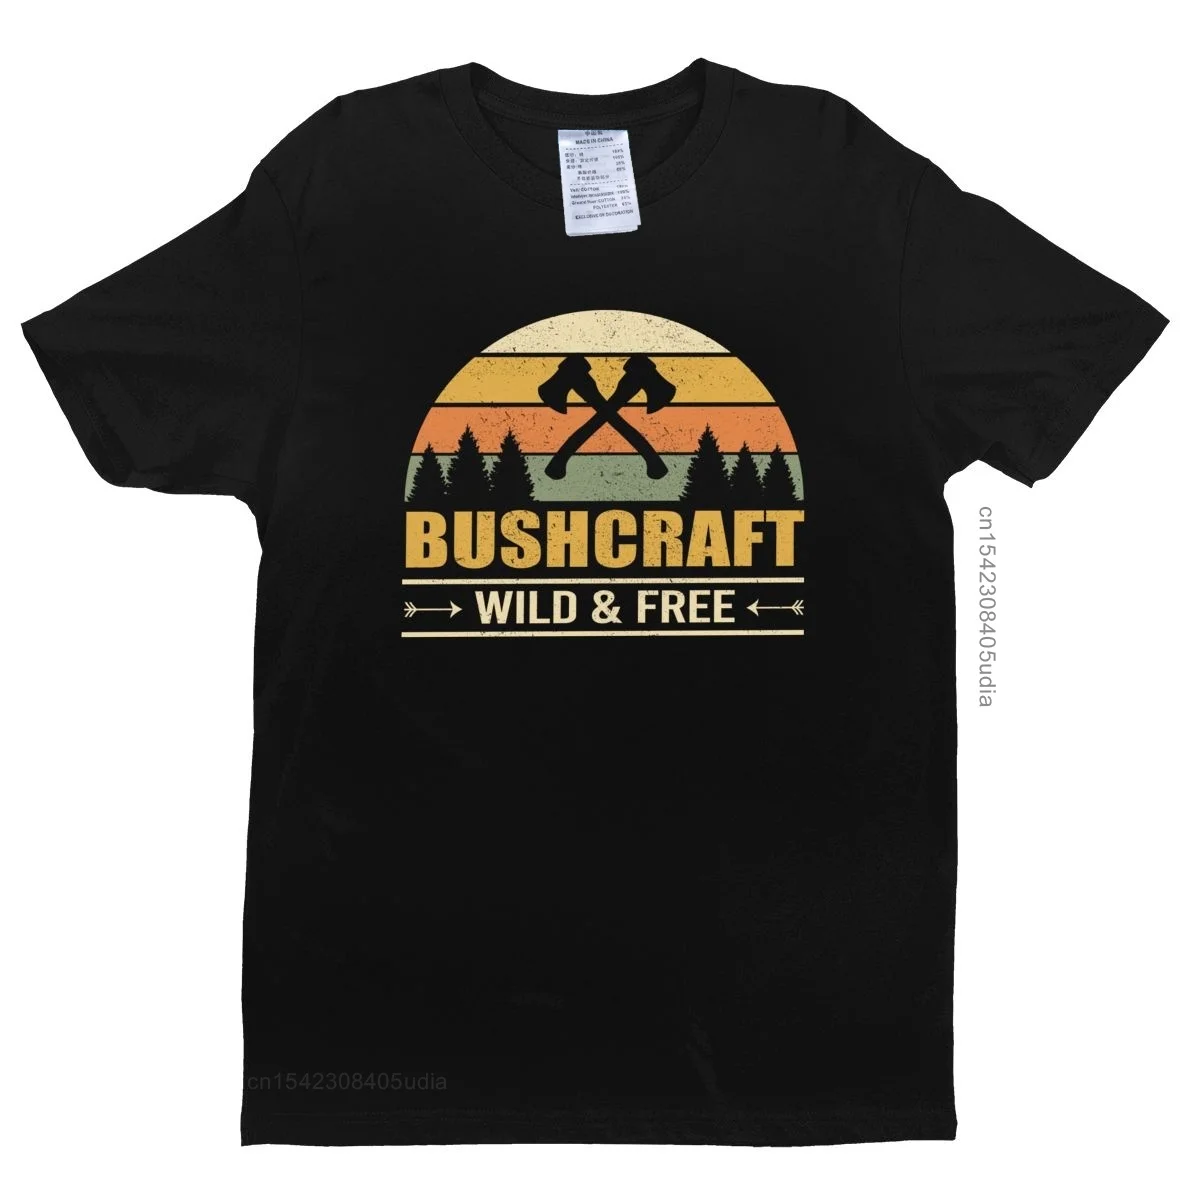 

Bushcraft Wild And Free T Shirt For Men Pure Cotton T-Shirt O-Neck Short Sleeved Outdoor Survival Hiking Camping Bushcrafter Tee